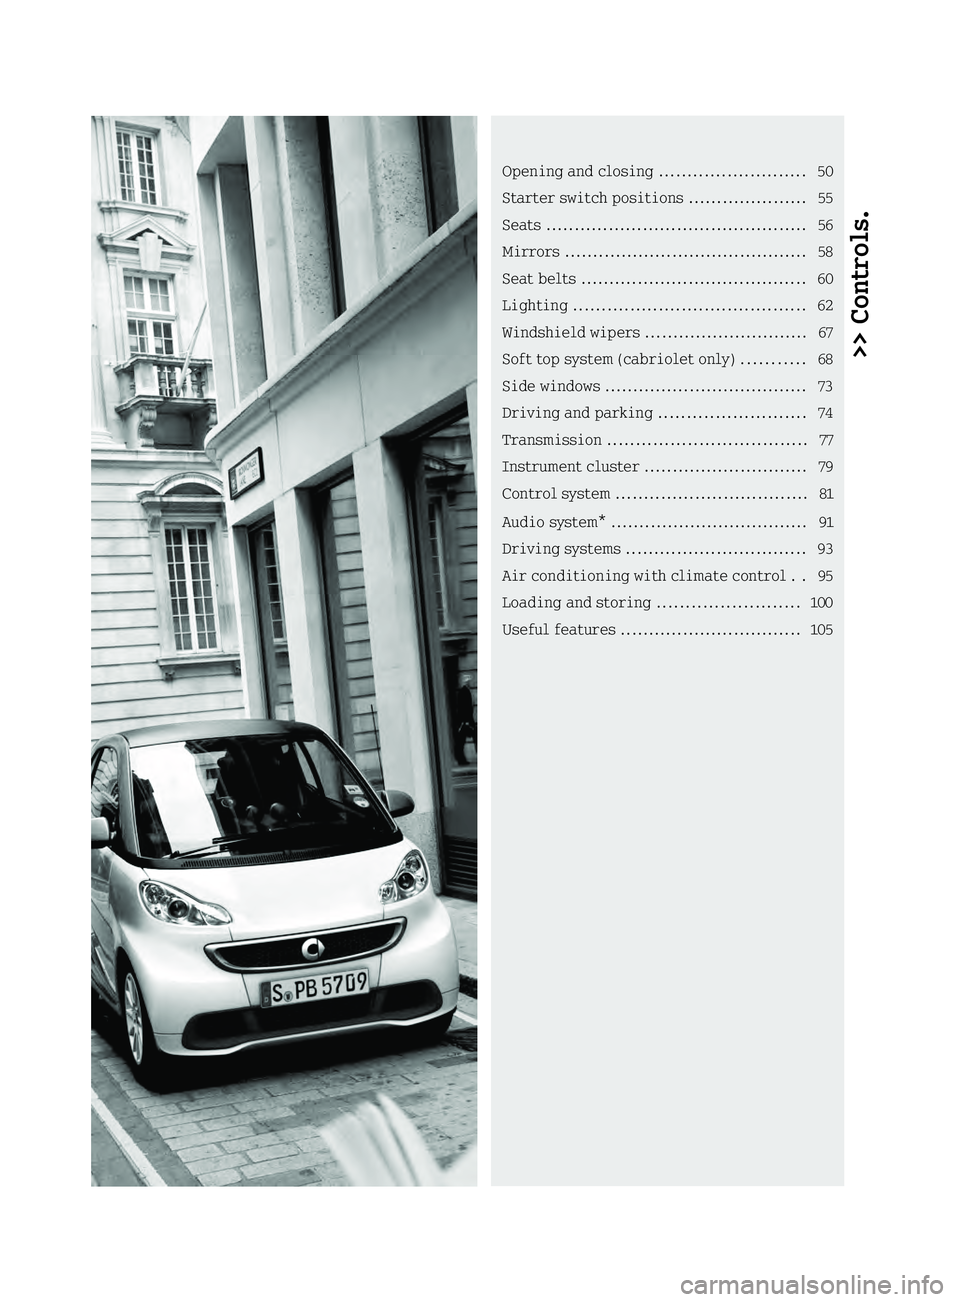 SMART FORTWO COUPE ELECTRIC DRIVE 2013 Workshop Manual >> Controls.Openin
gand closing .......................... 50
Starter switch positions .....................55
Seats .............................................. 56
Mirrors .........................